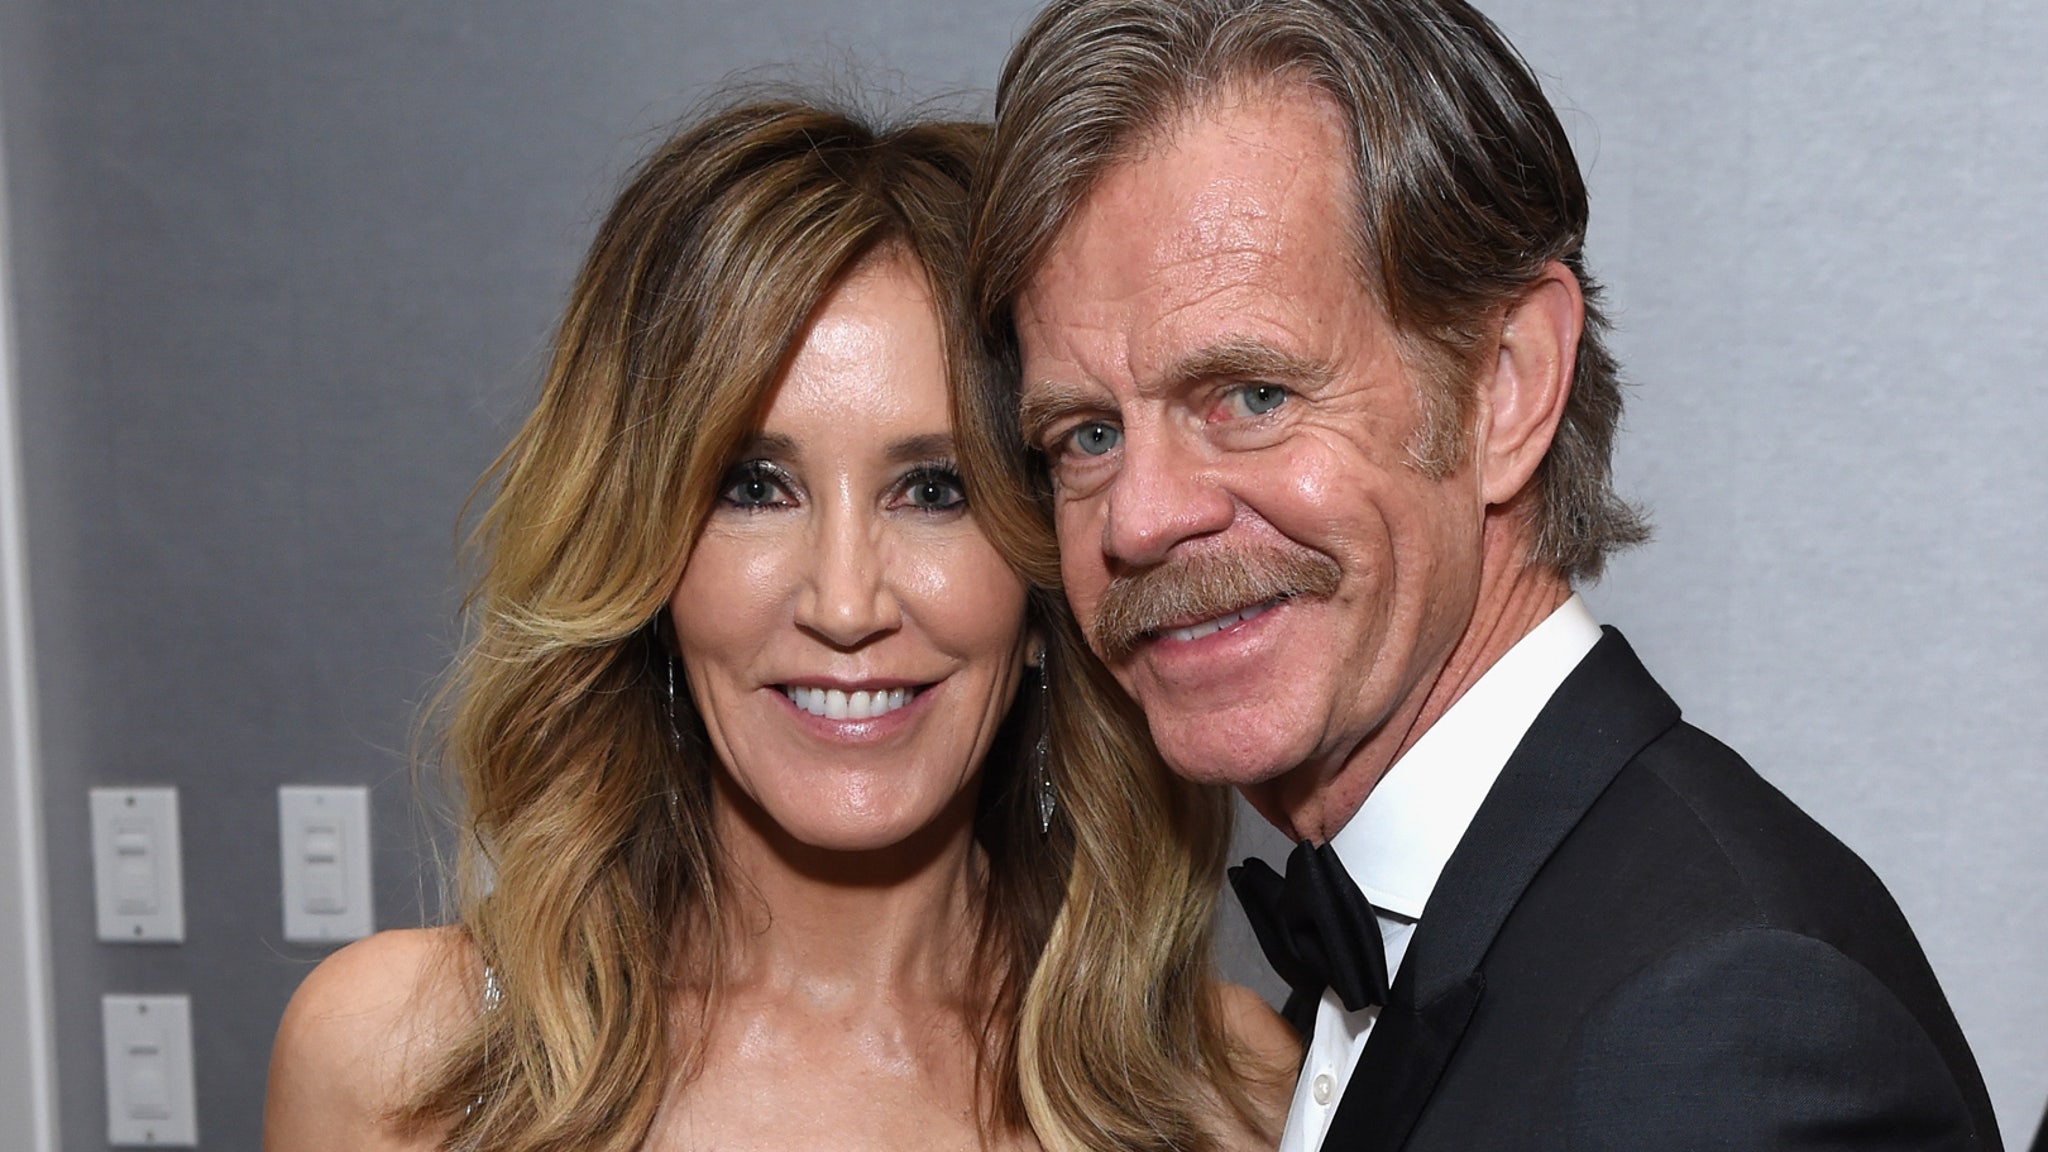 William H Macy Interview on Lying: Felicity Huffman Admissions Scam